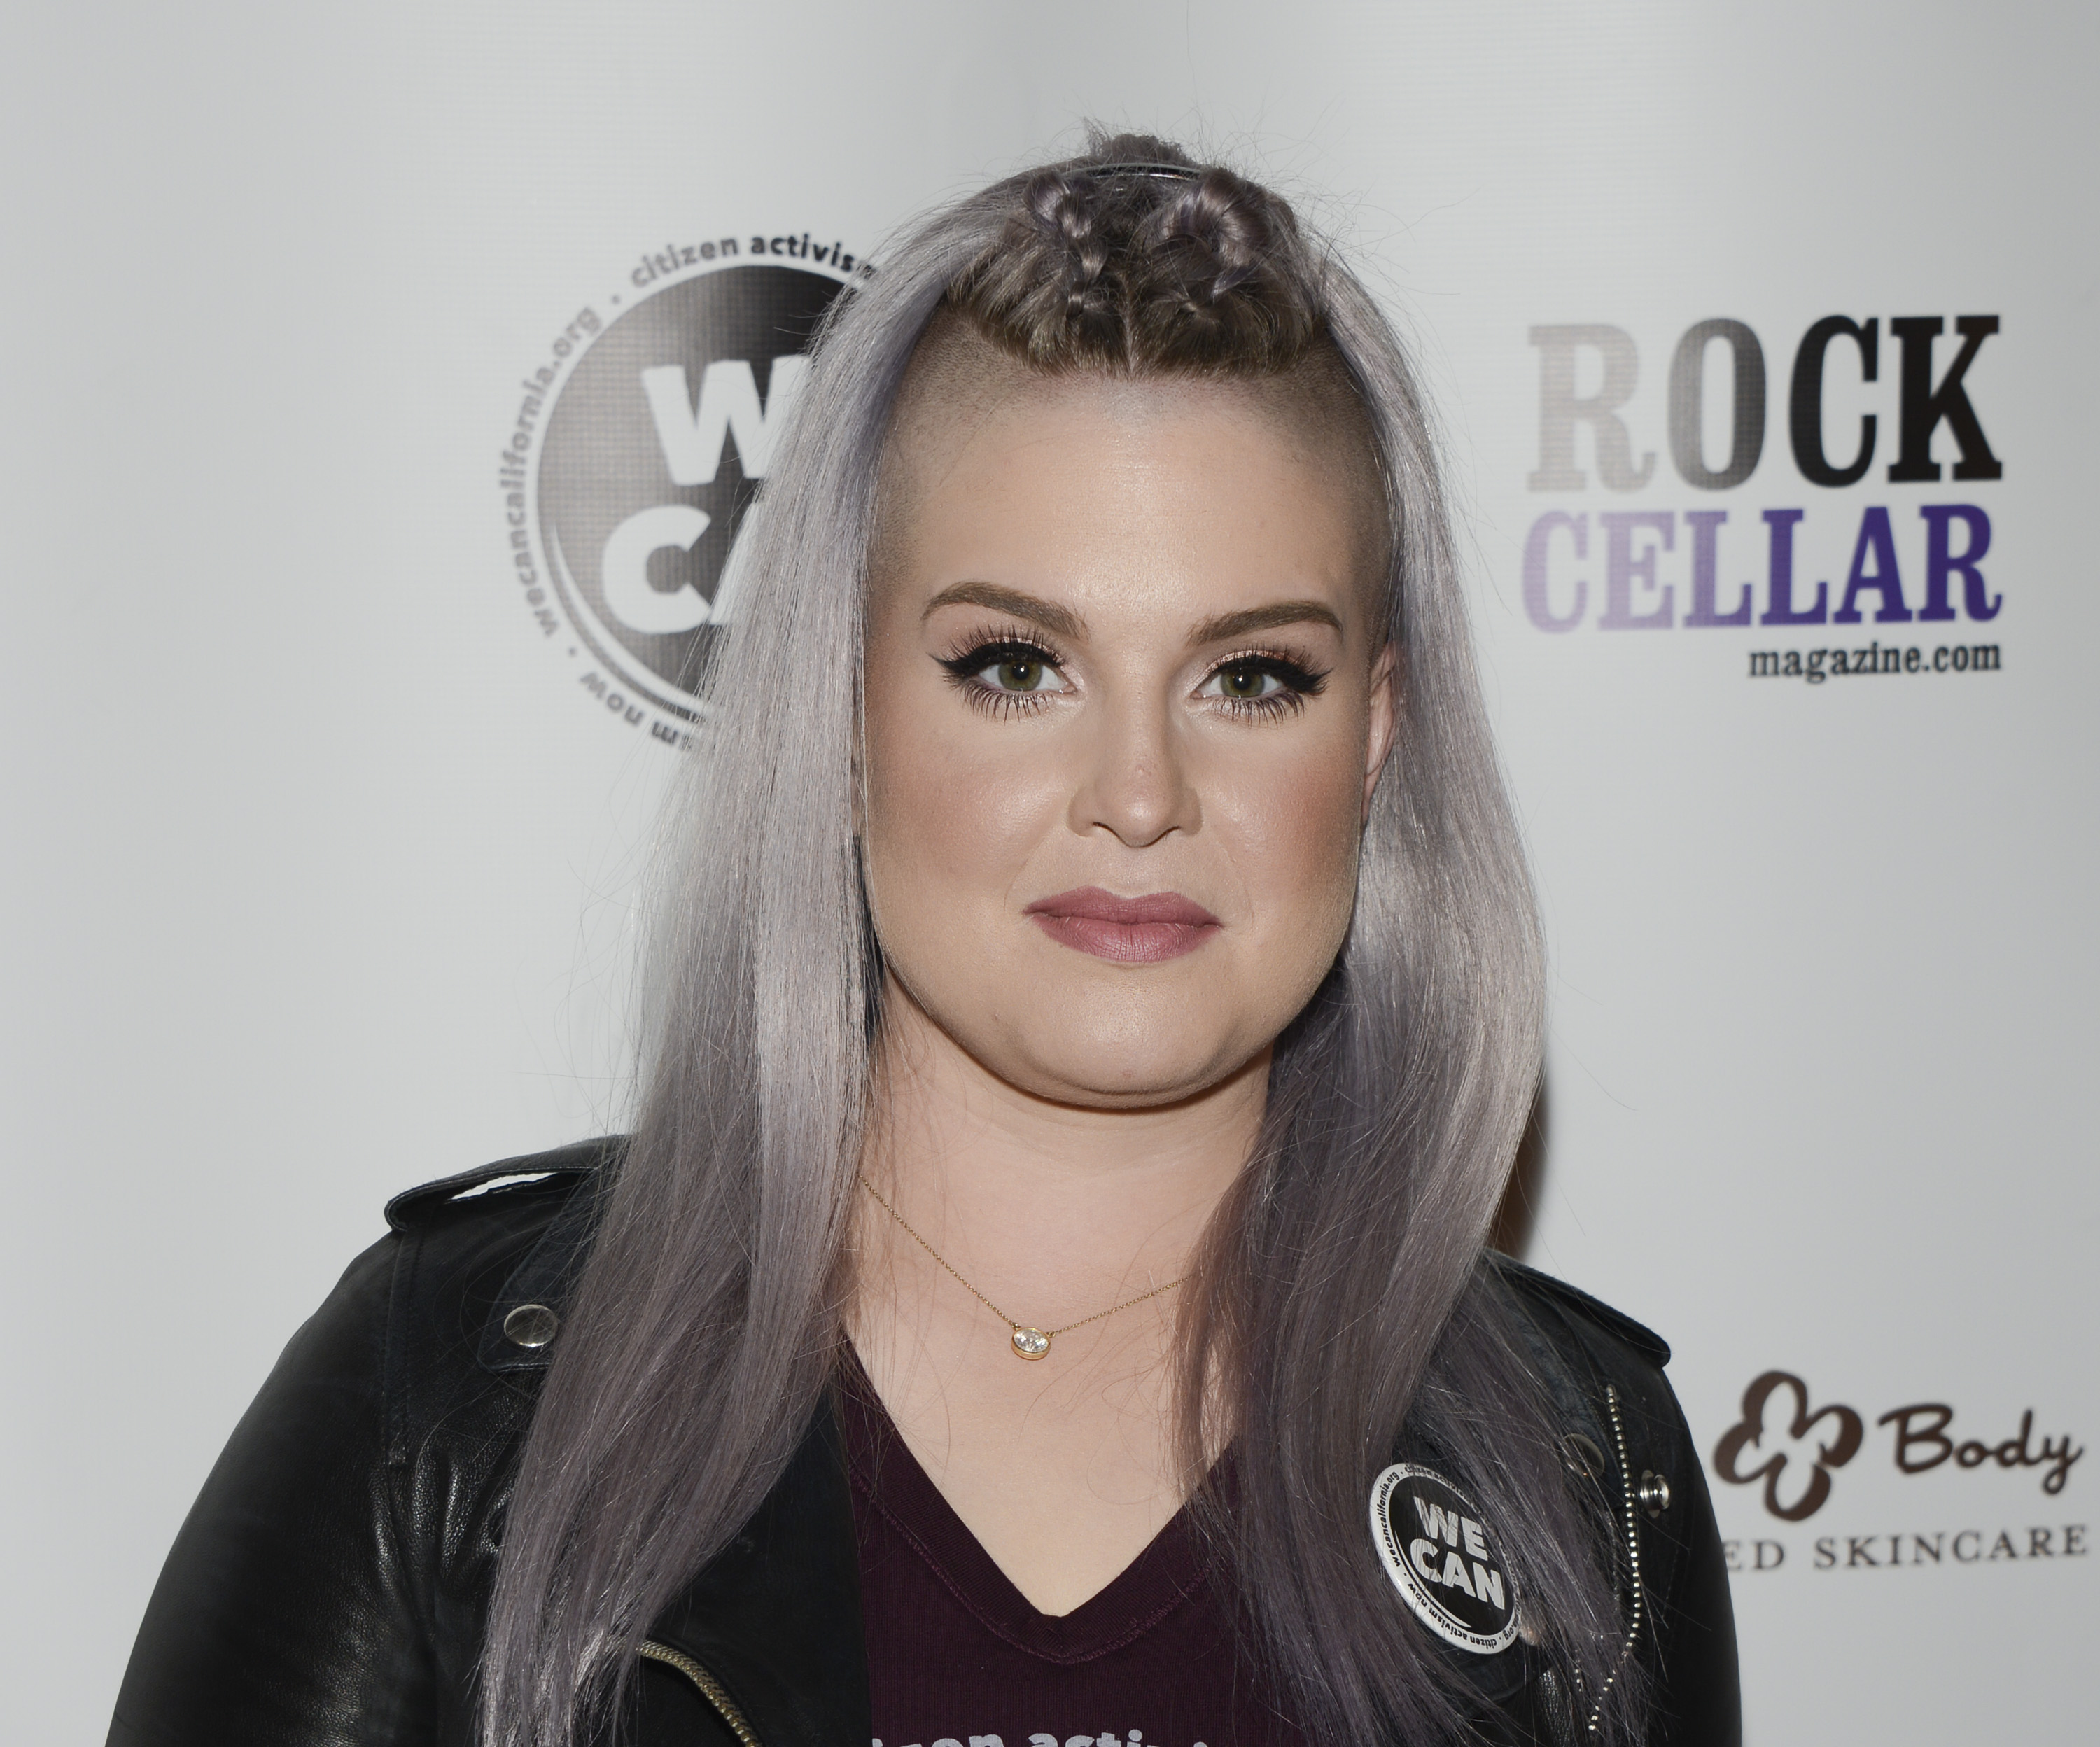 Kelly Osborne attends 'The Care Concert - There's Not Place That's Home' at The Palace Theatre in Los Angeles, California, on June 10, 2017. | Source: Getty Images